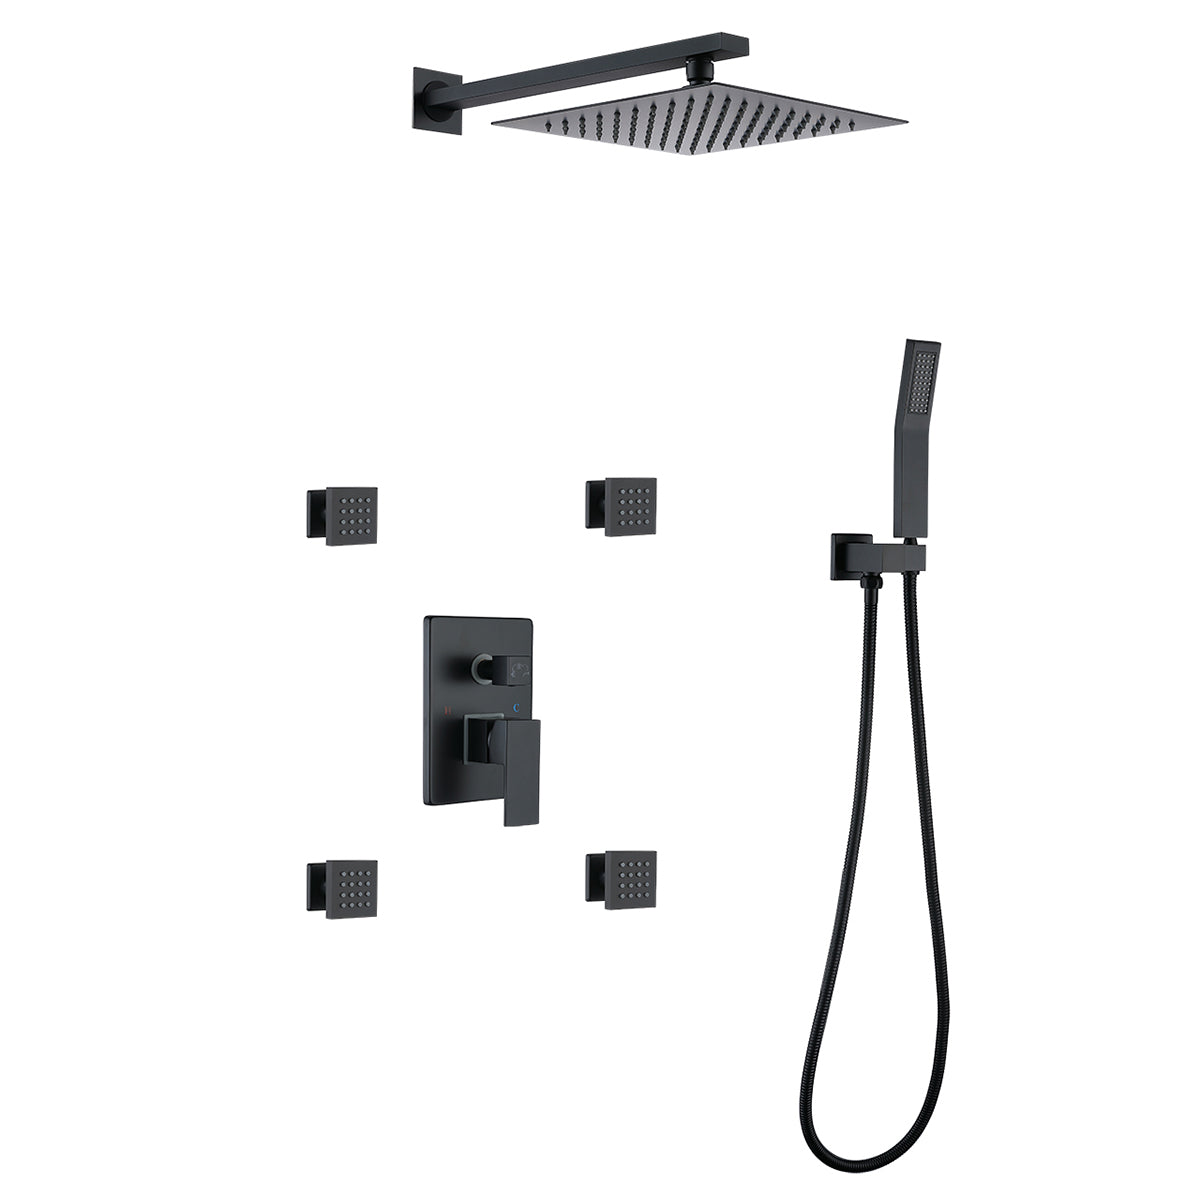 Waterfall Top Spray Wall Type Bathroom Shower System with Black 4 Side Spray Hot and Cold Body